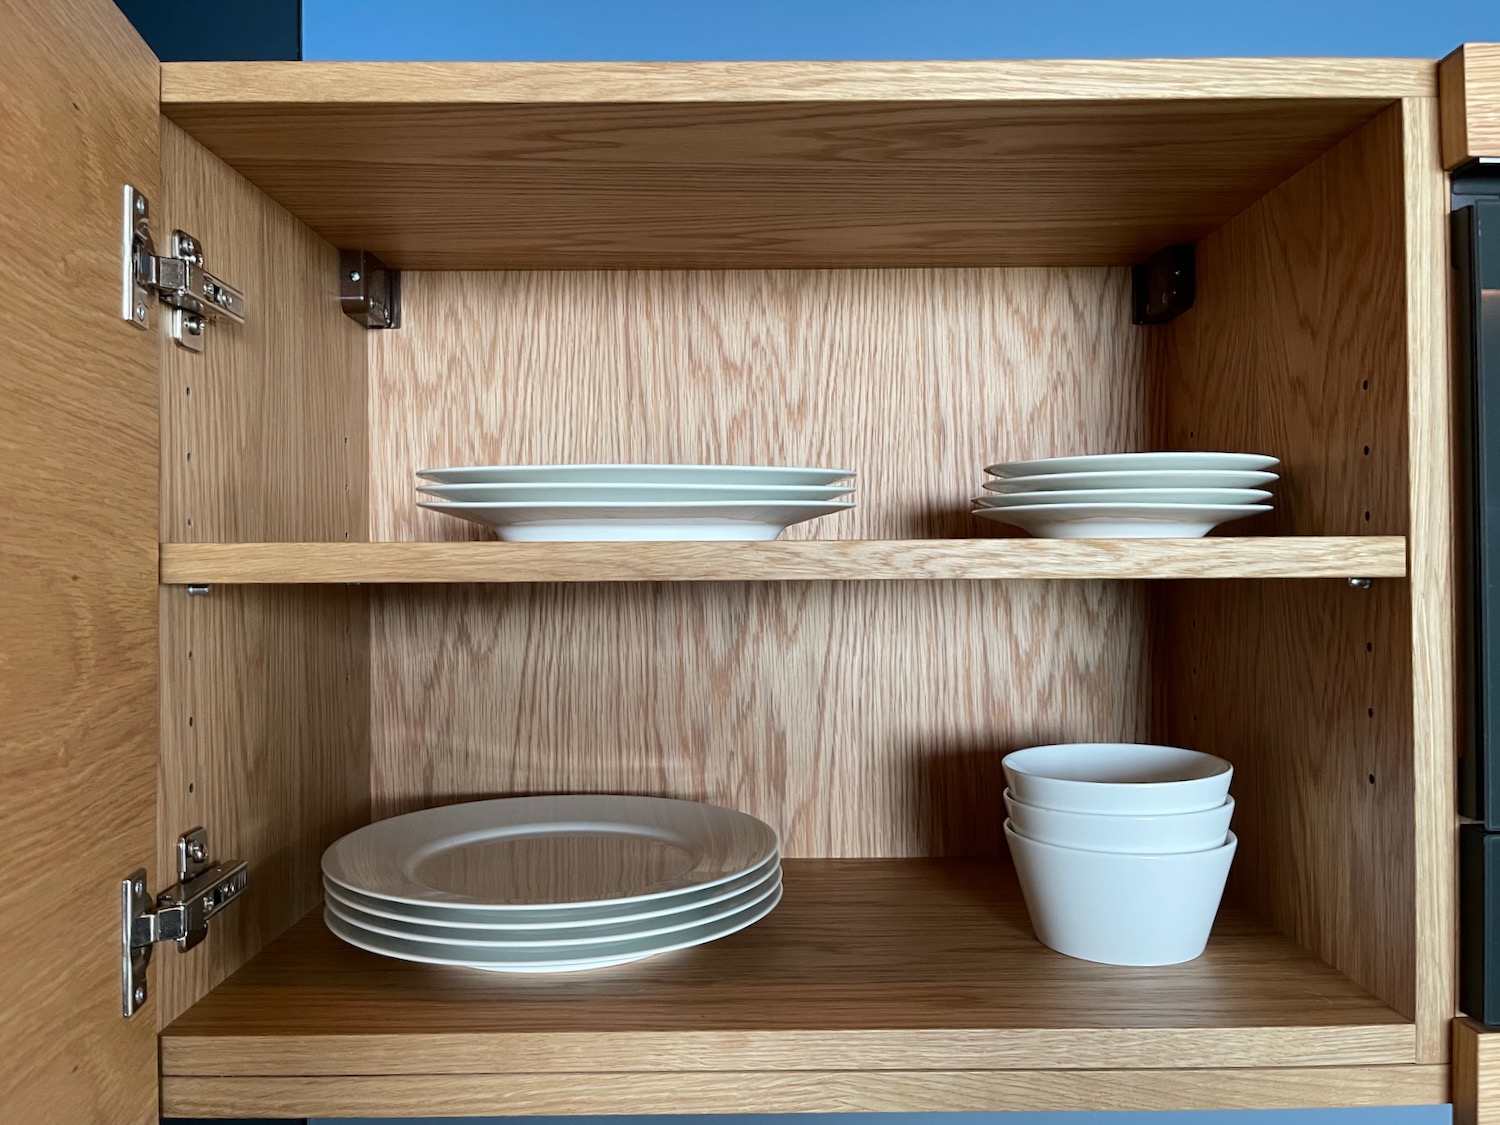 a wooden cabinet with plates and bowls